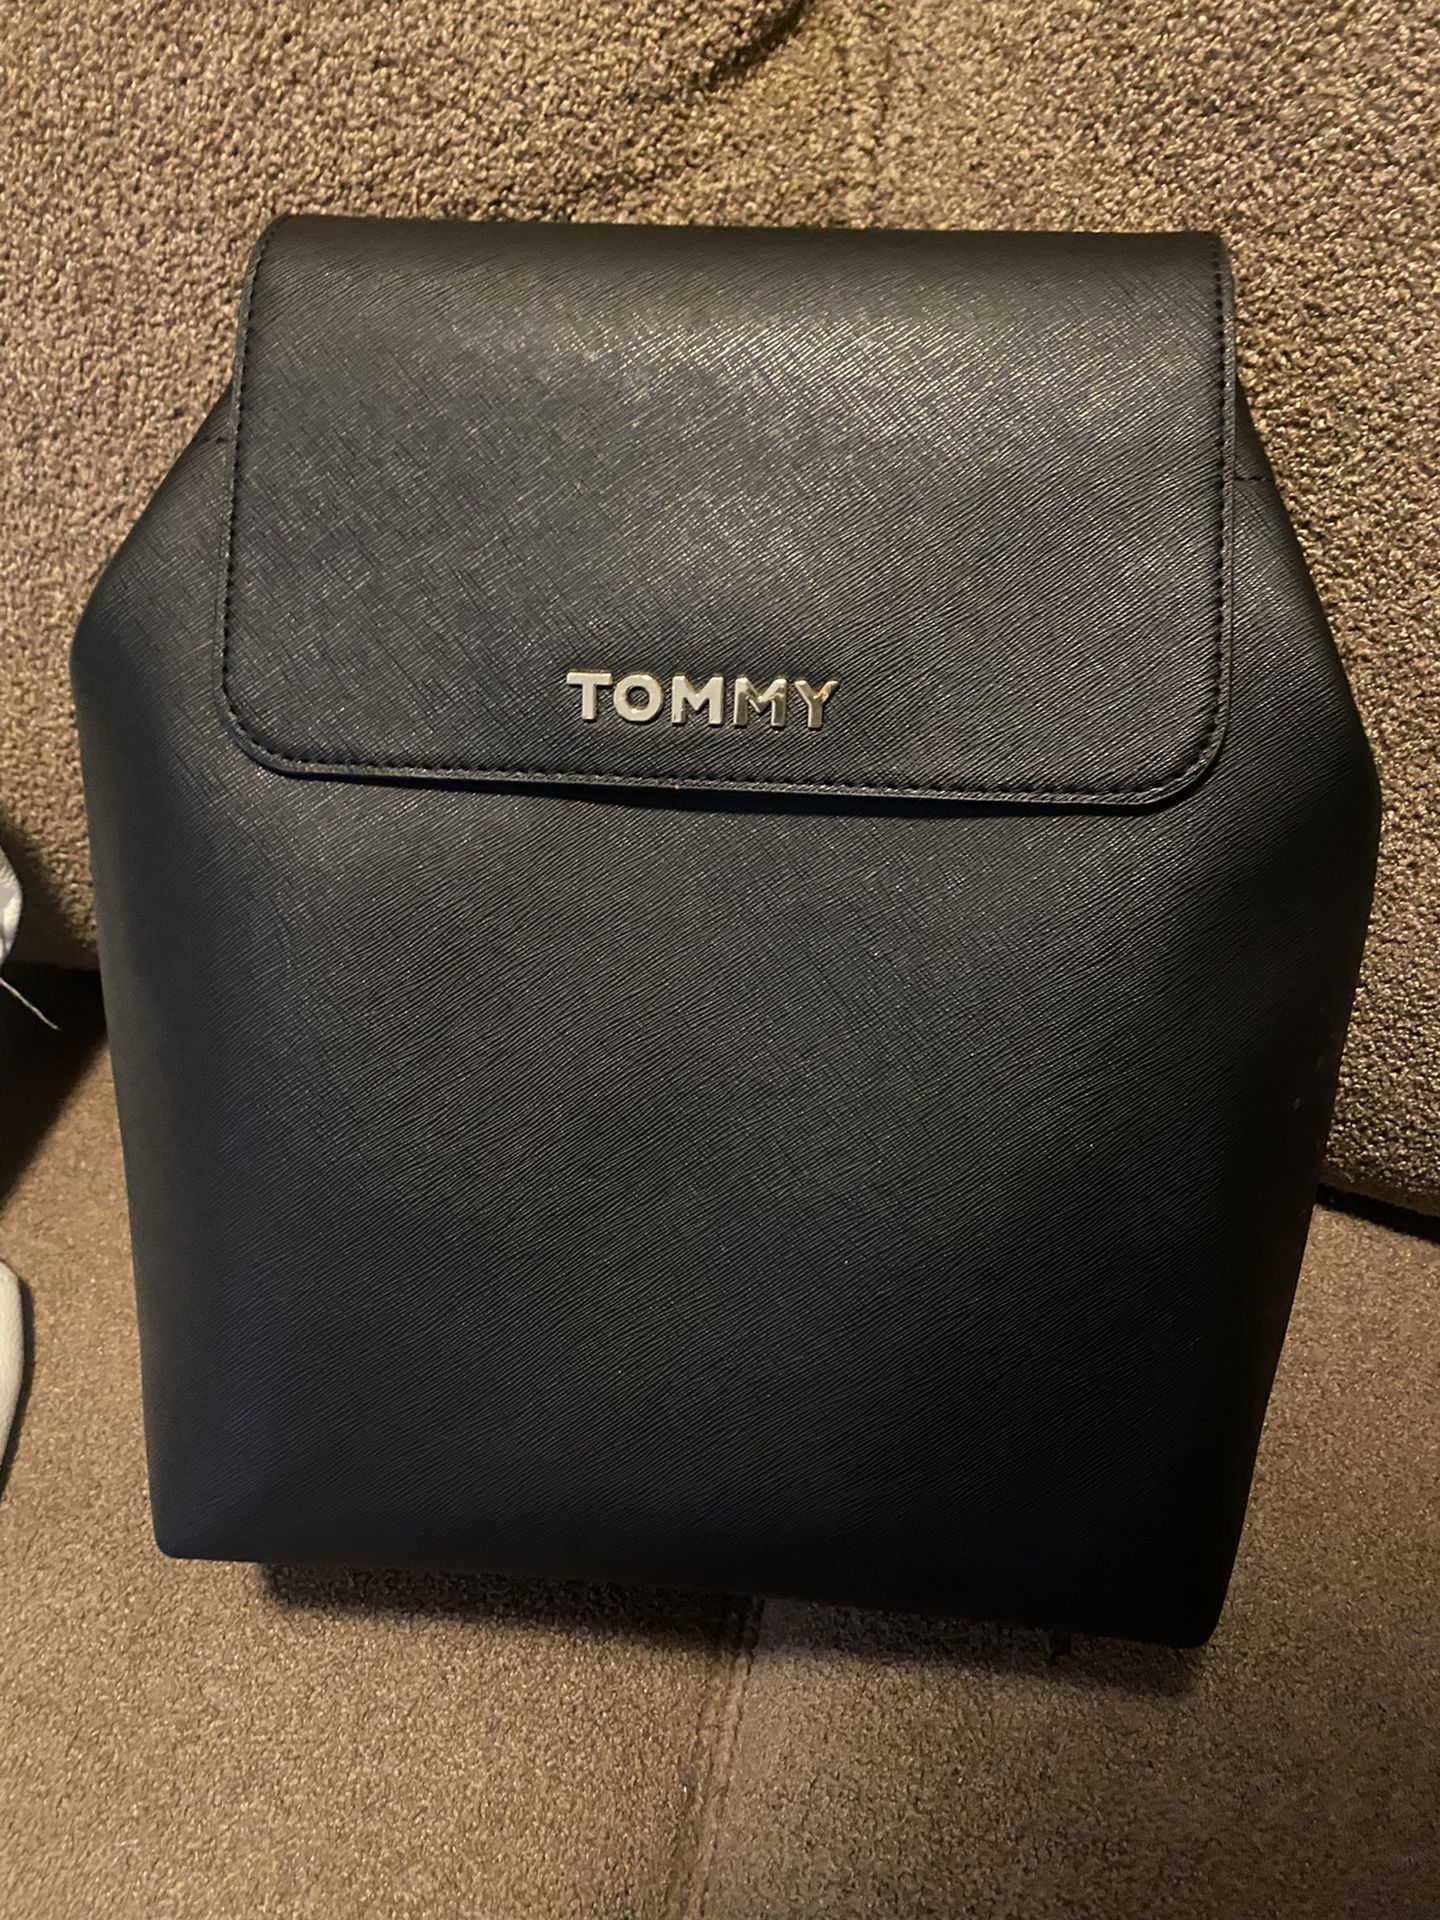 Tommy Backpack